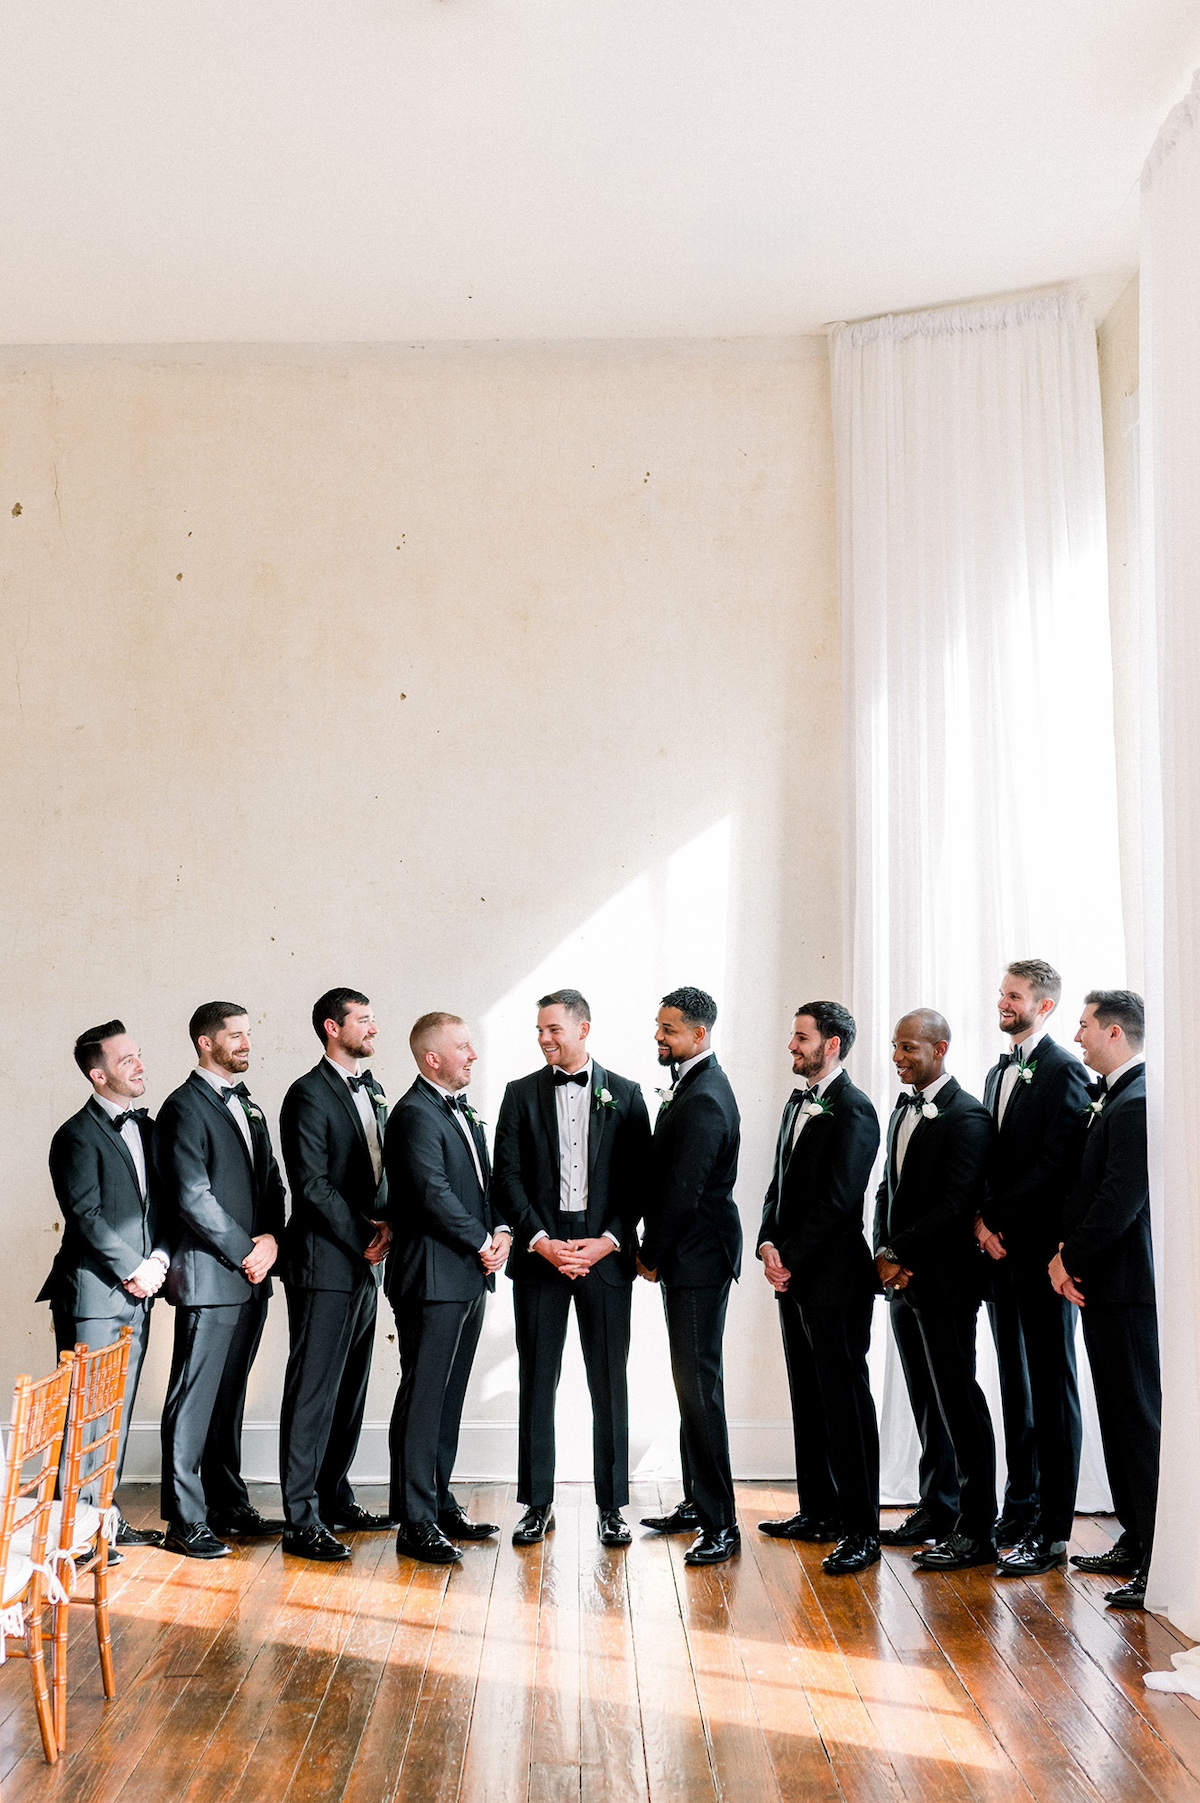 Group portrait of groomsmen in editorial style, embodying a collective sense of high-end fashion and sophistication.